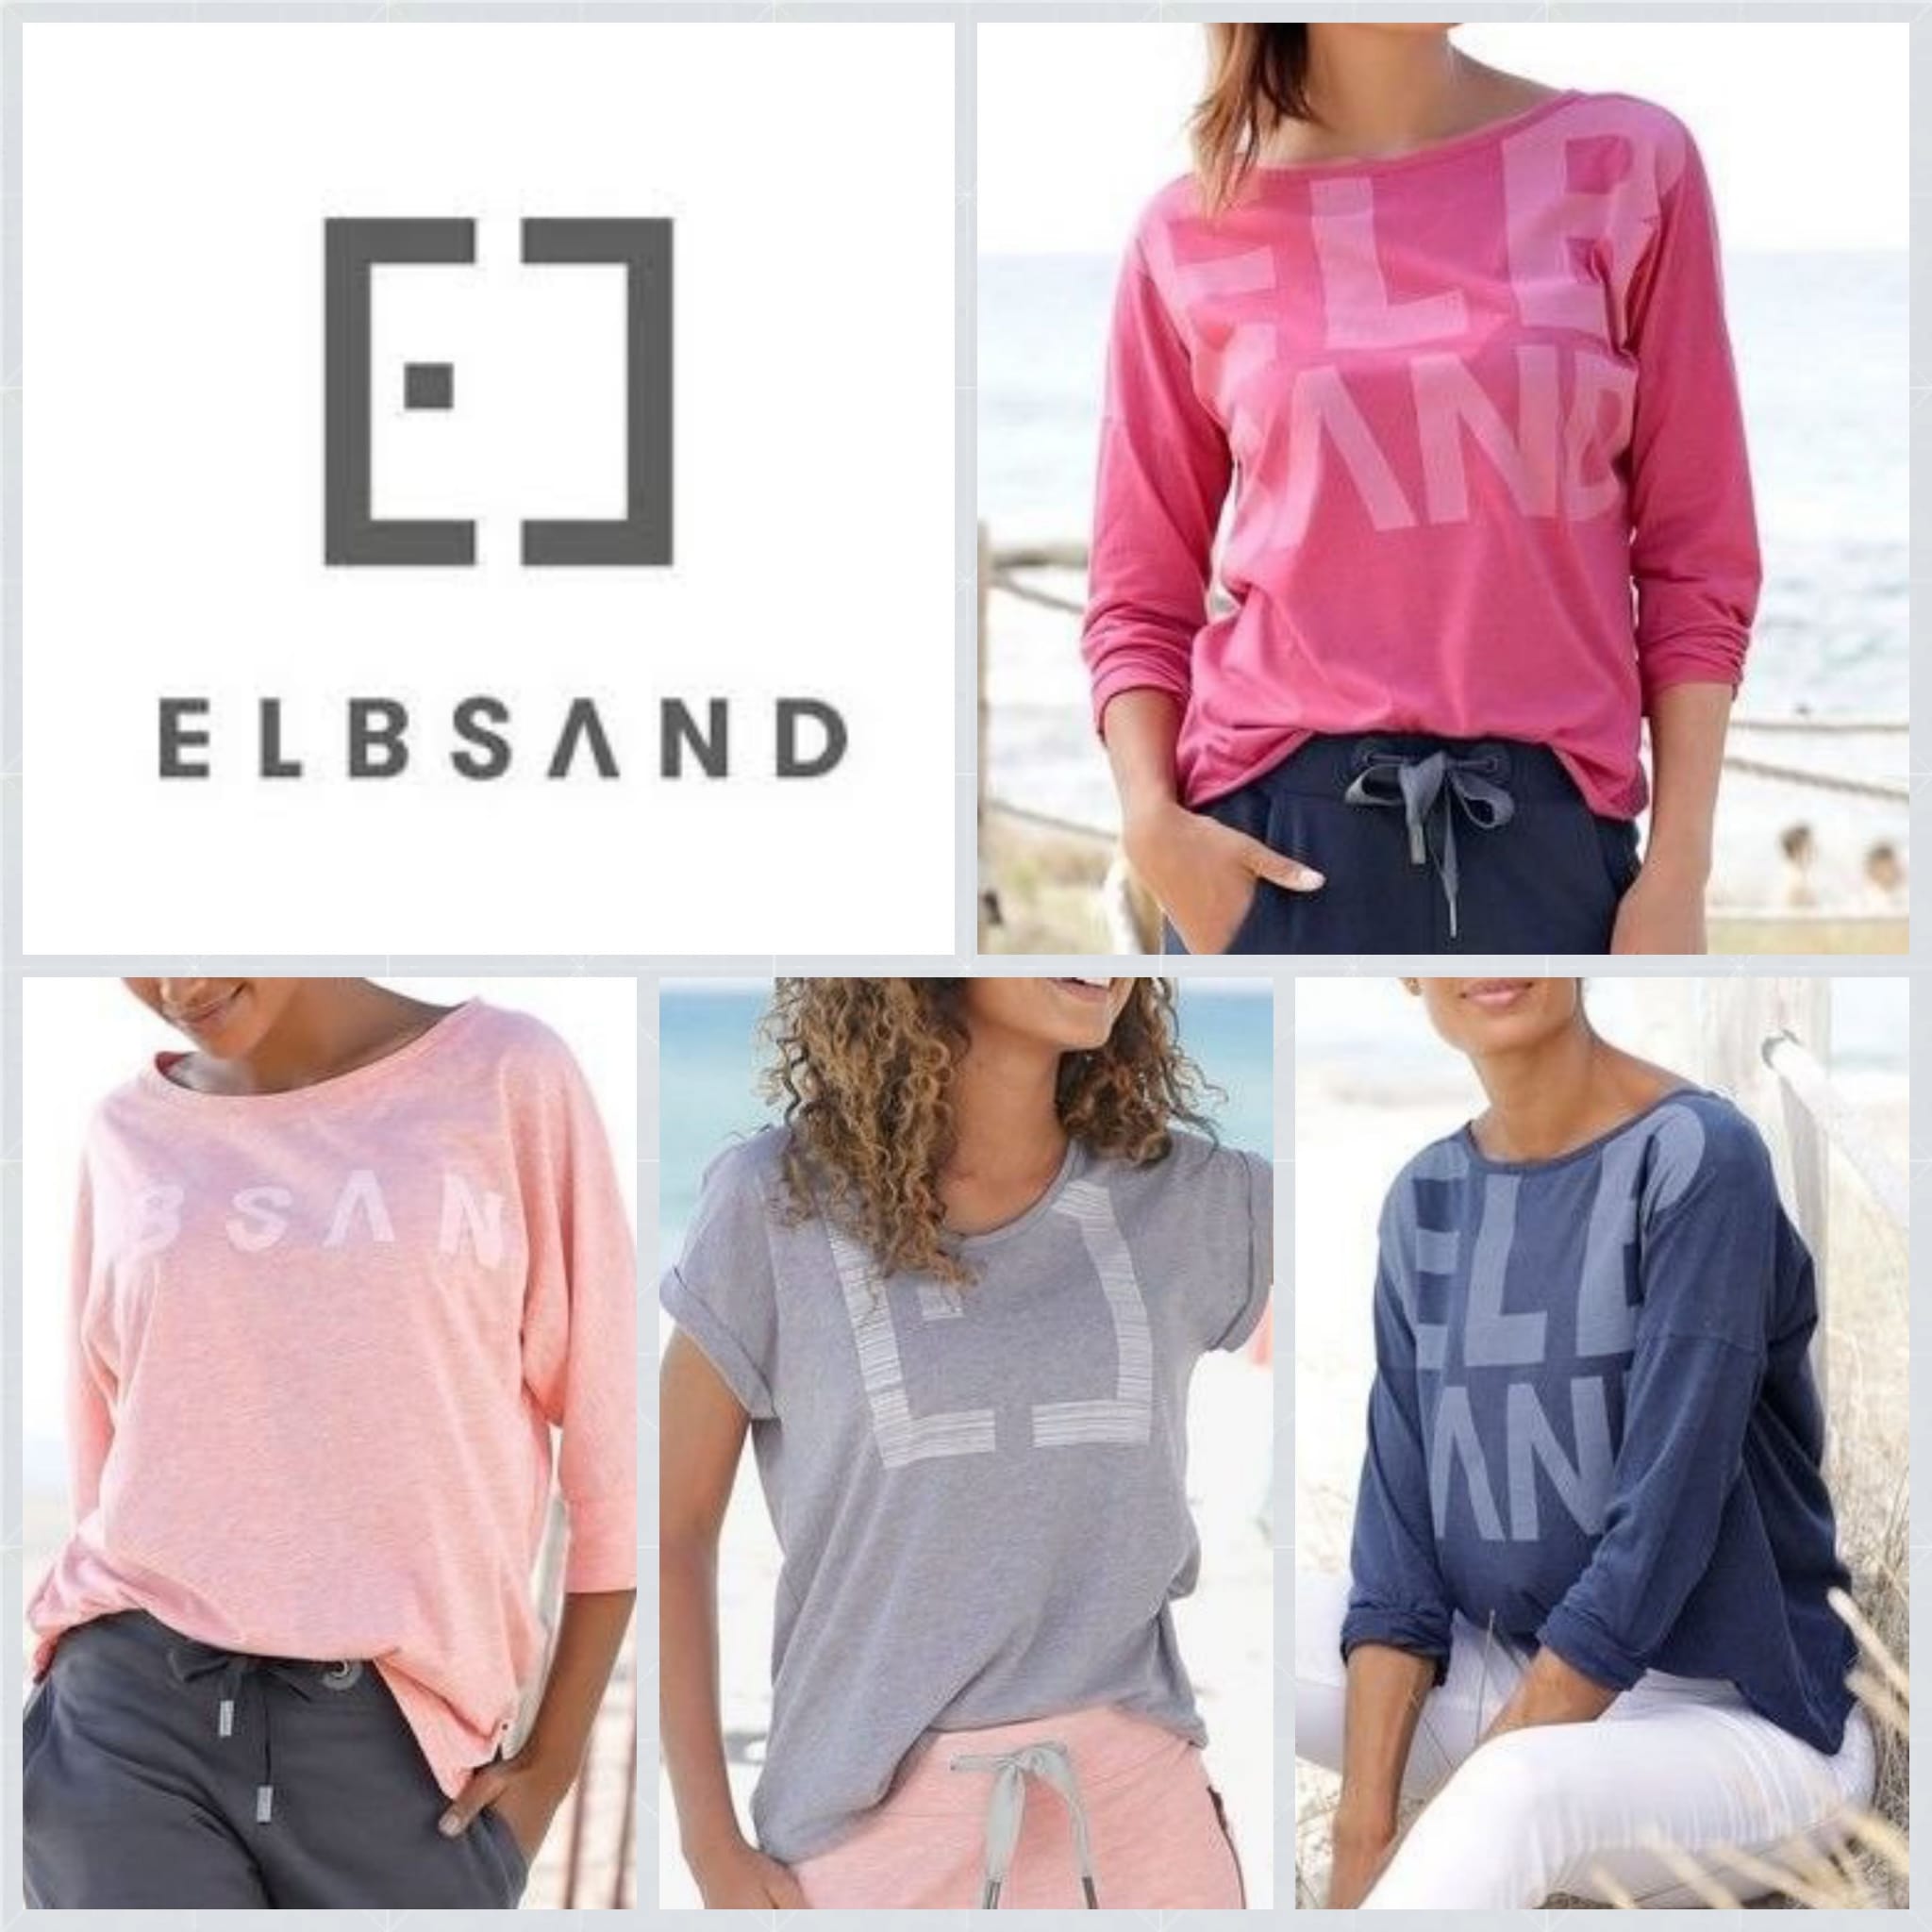 Women's T-shirts from Elbsand